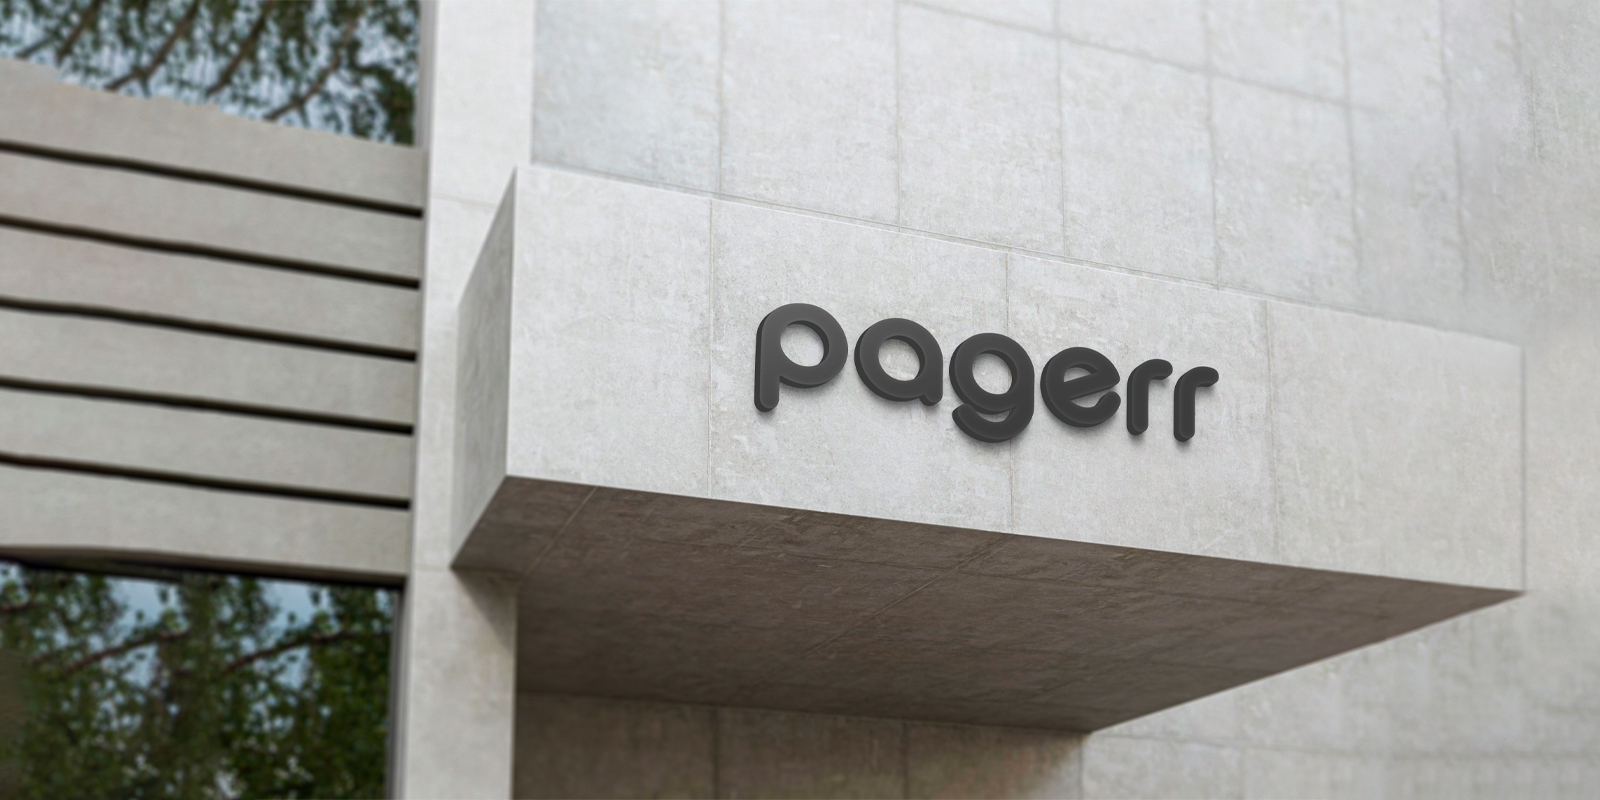 Logo signs in Seville - Print with Pagerr